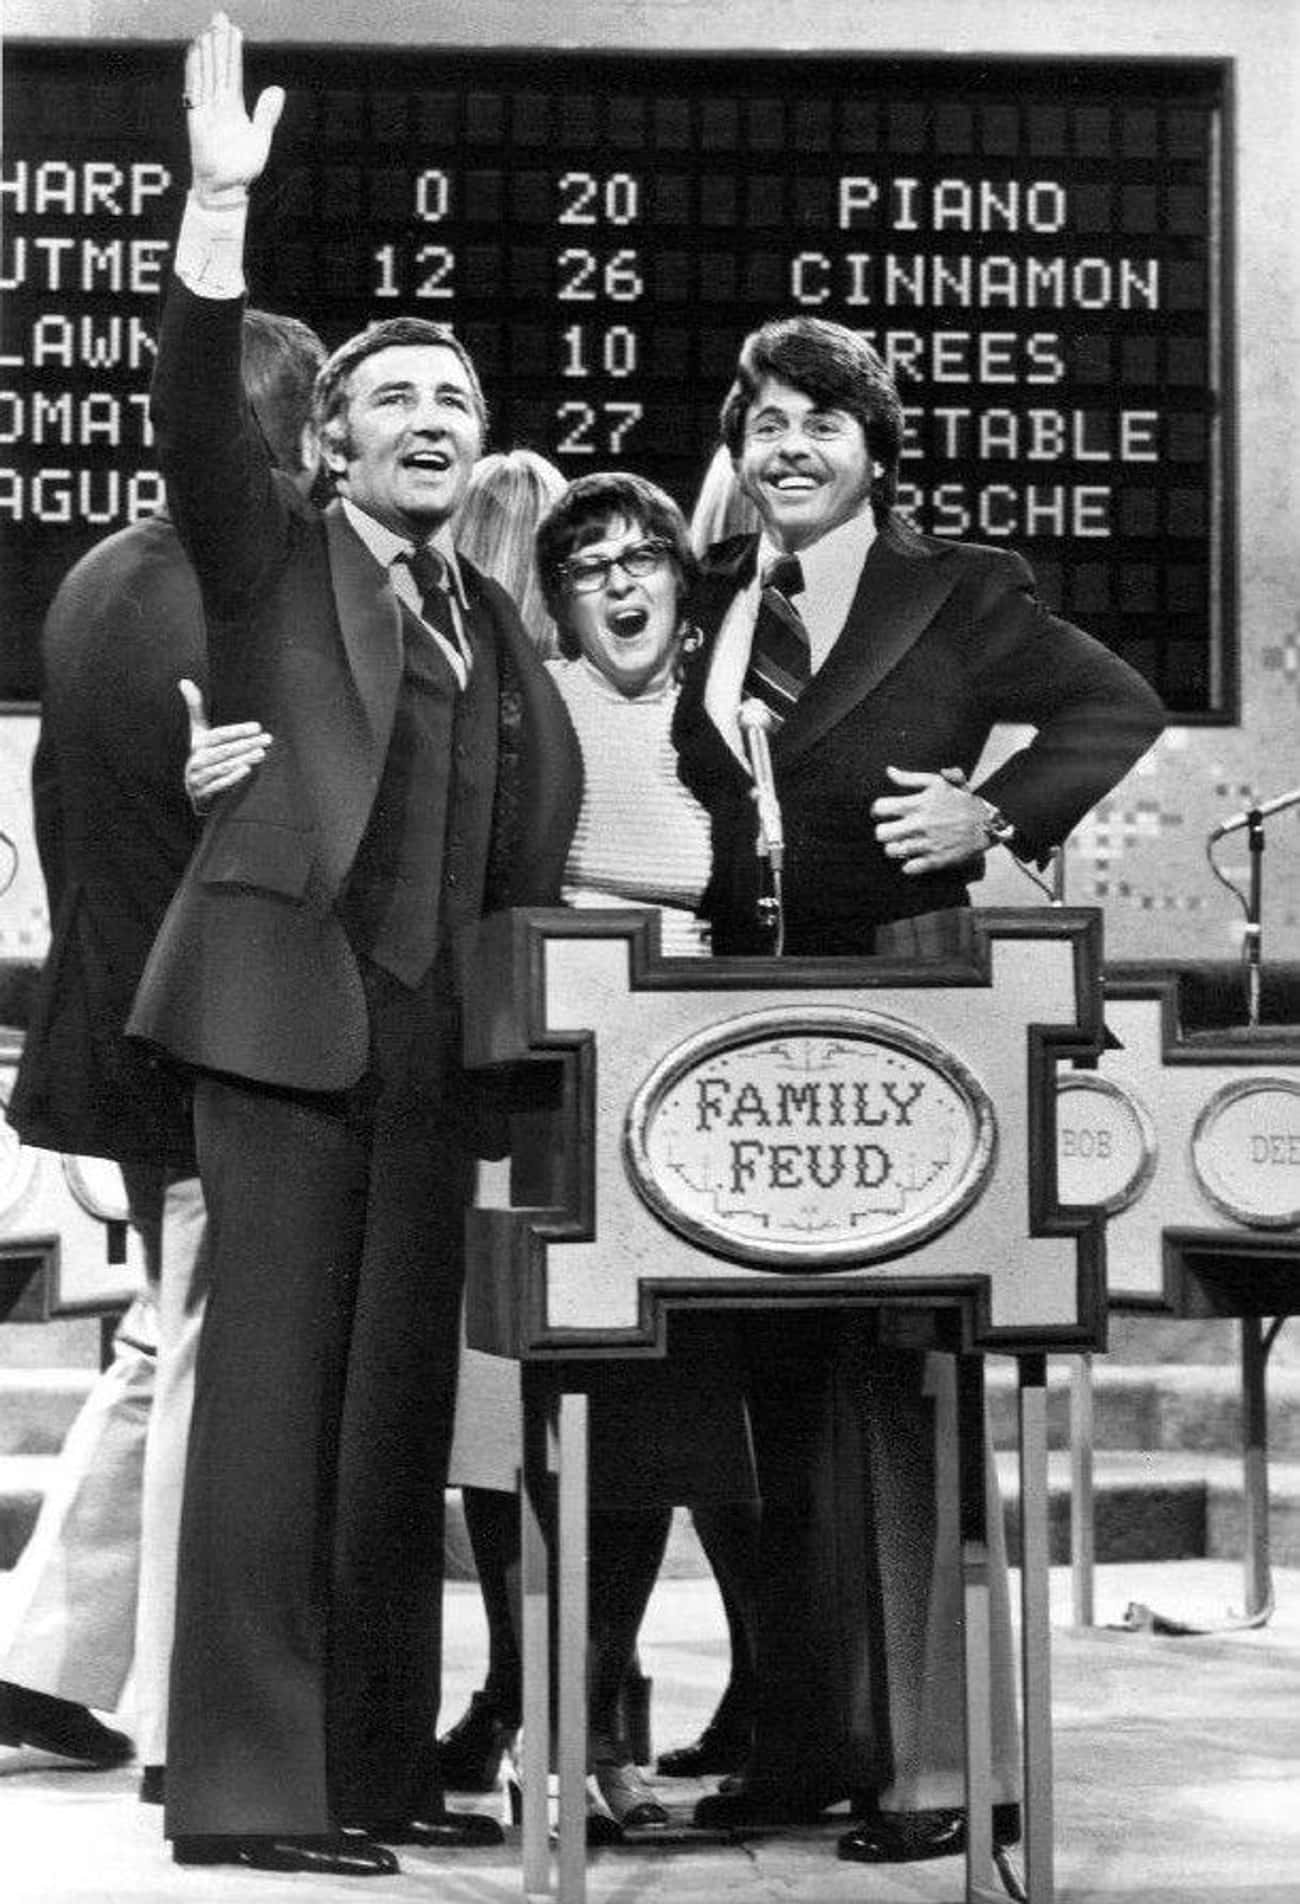 Richard Dawson Met His Future Wife On 'Family Feud' And Let Deaf Kids Know They Were Loved